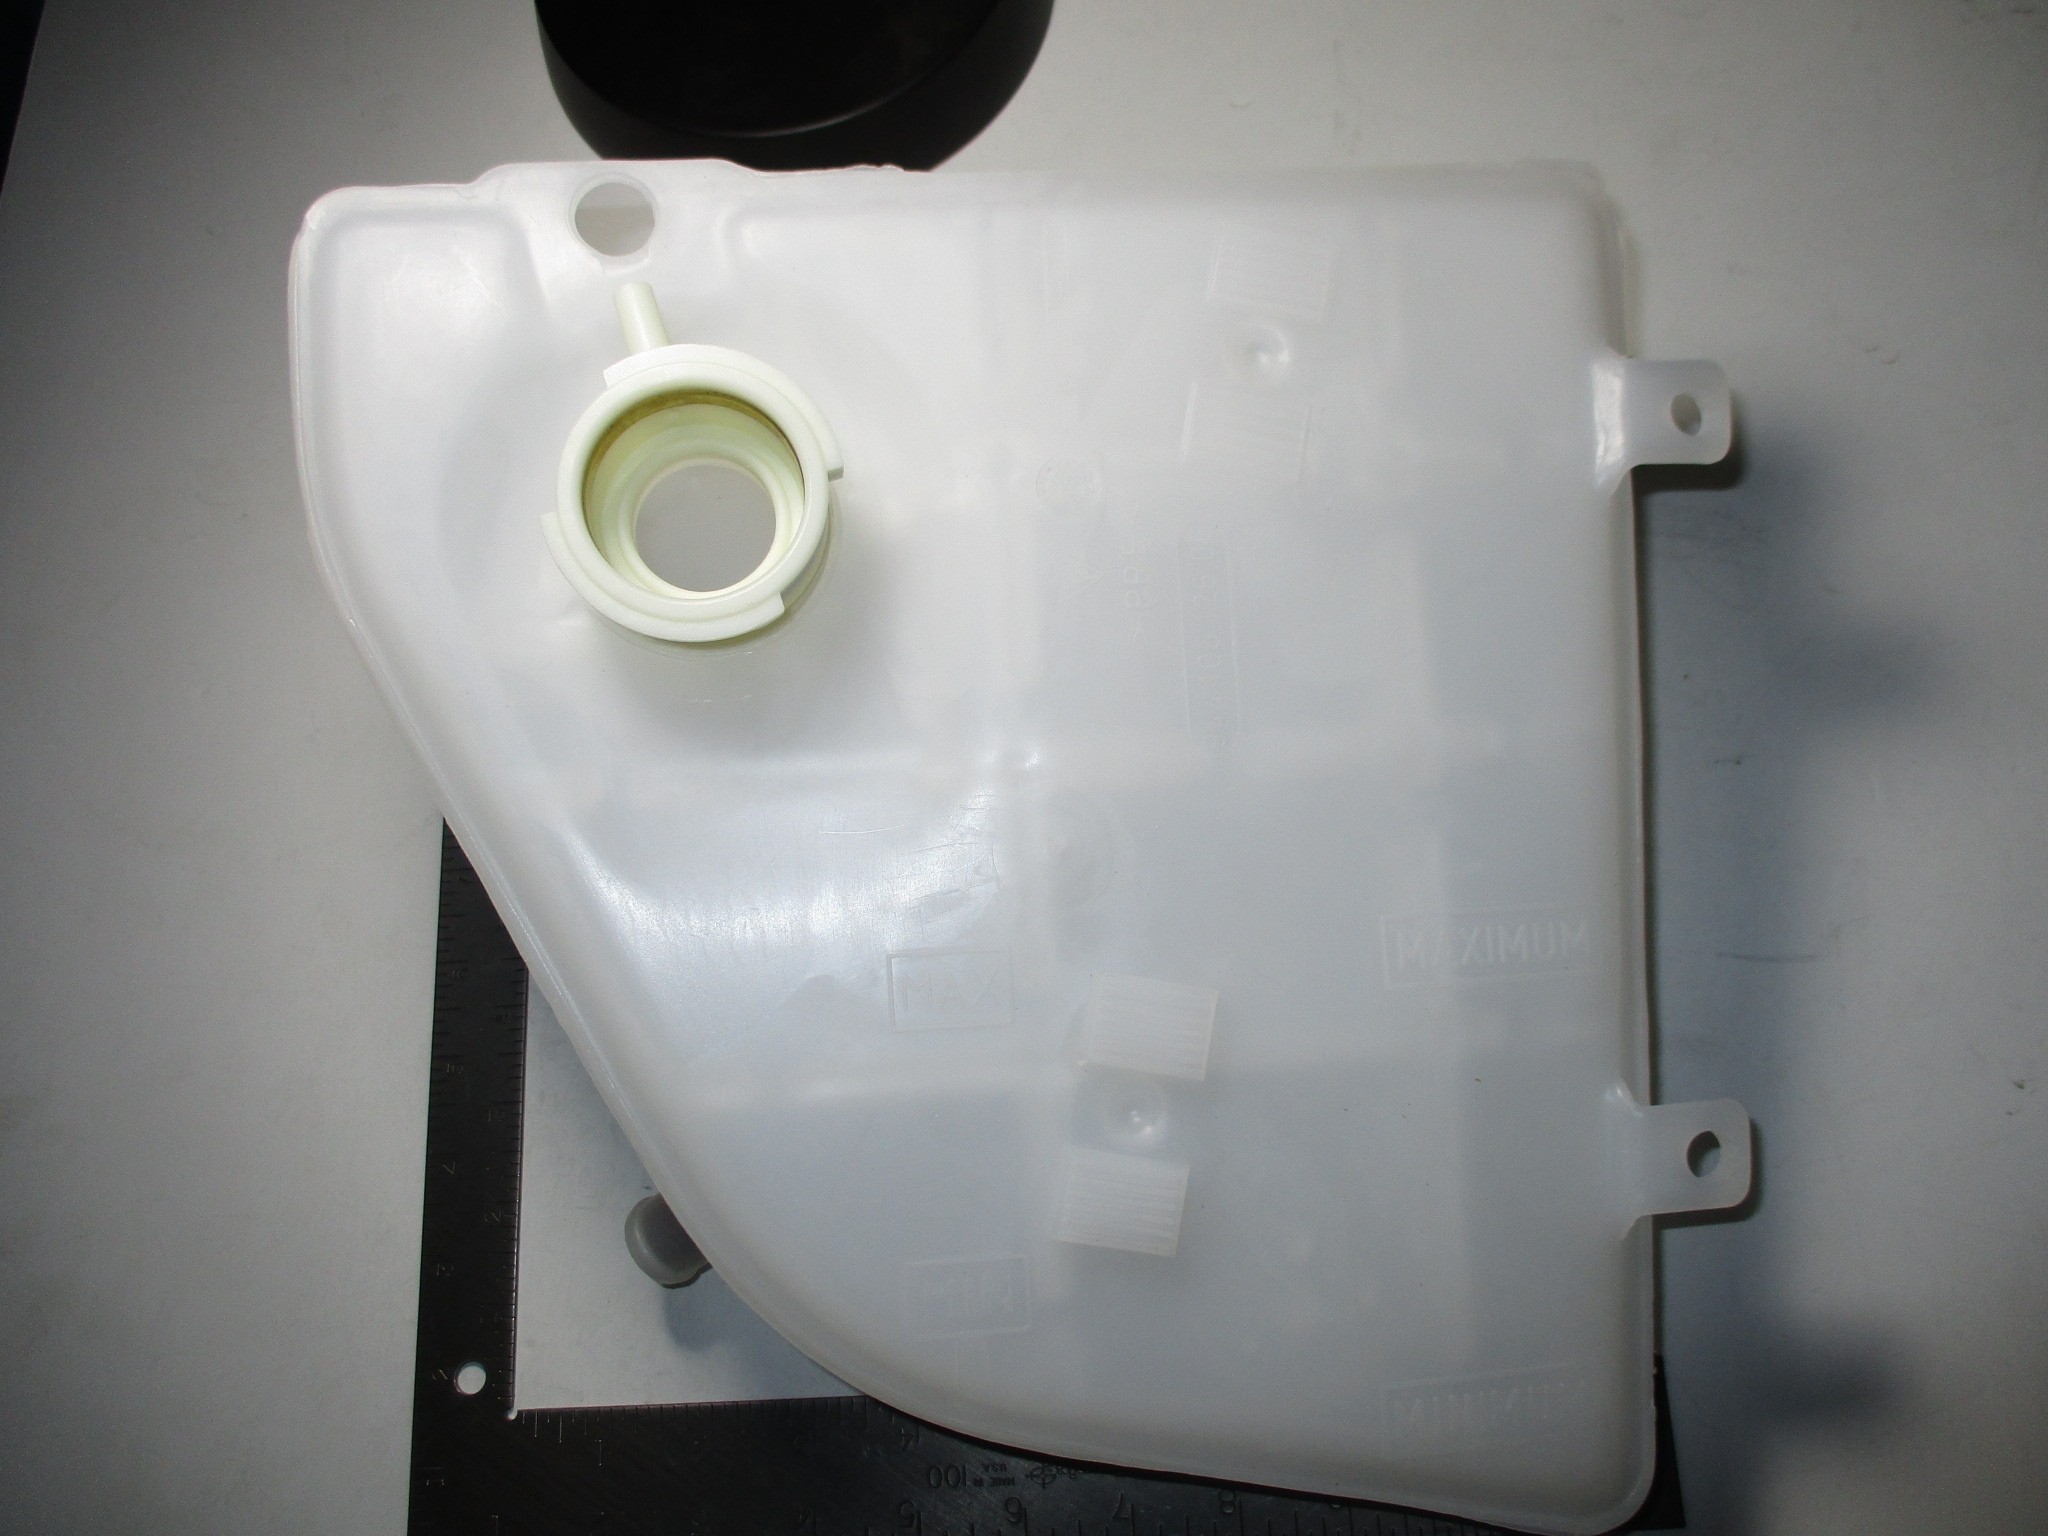 expansion tank 924s 944 944s 944s2